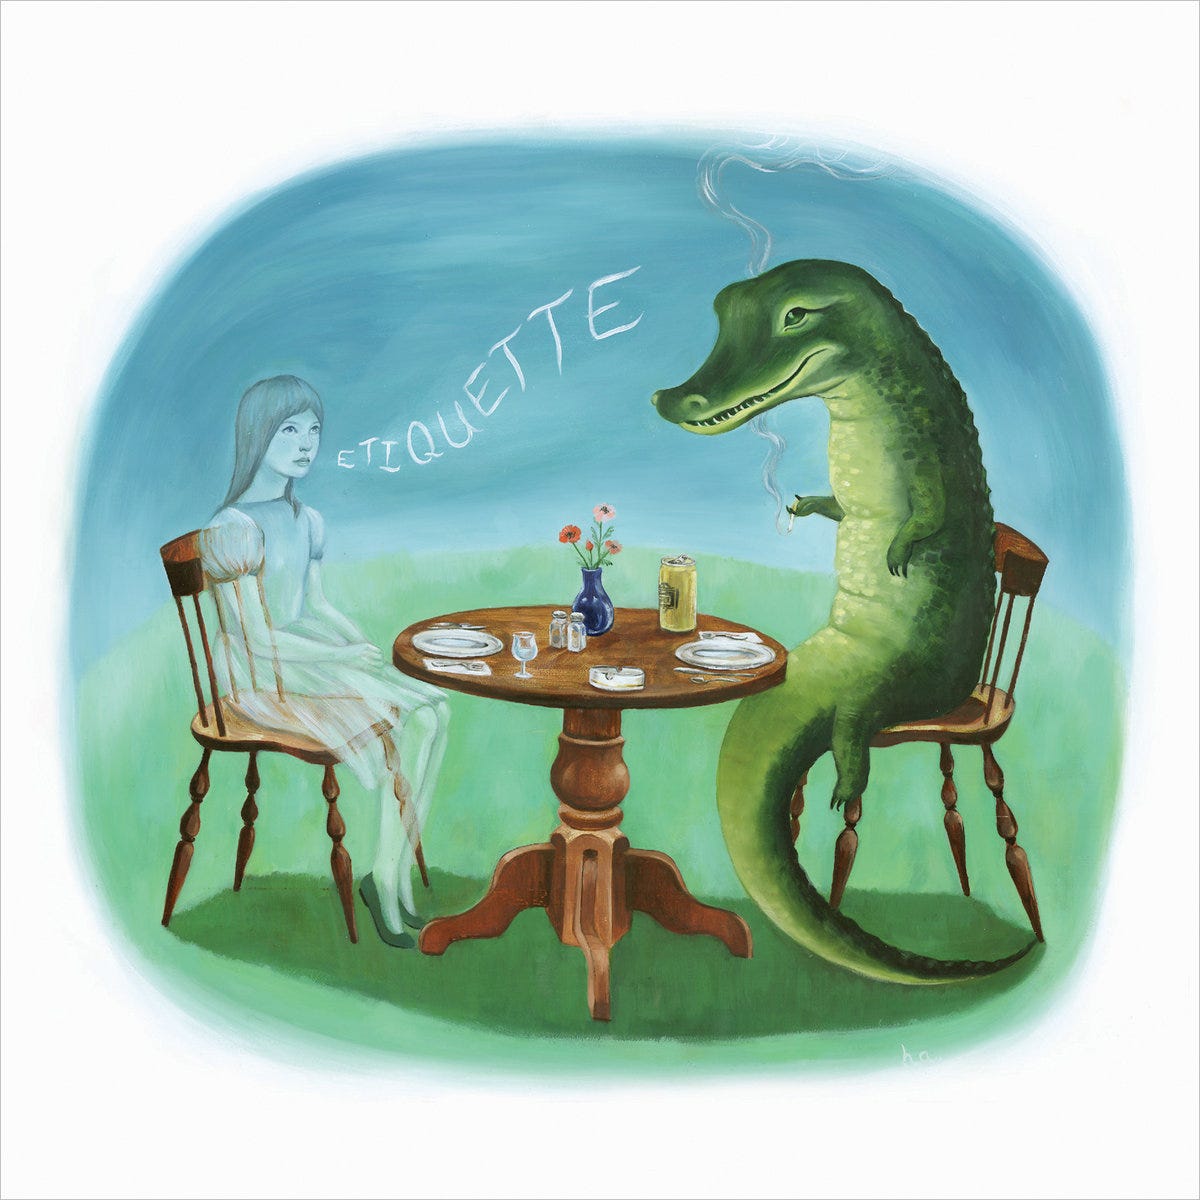 Etiquette | Casiotone for the Painfully Alone